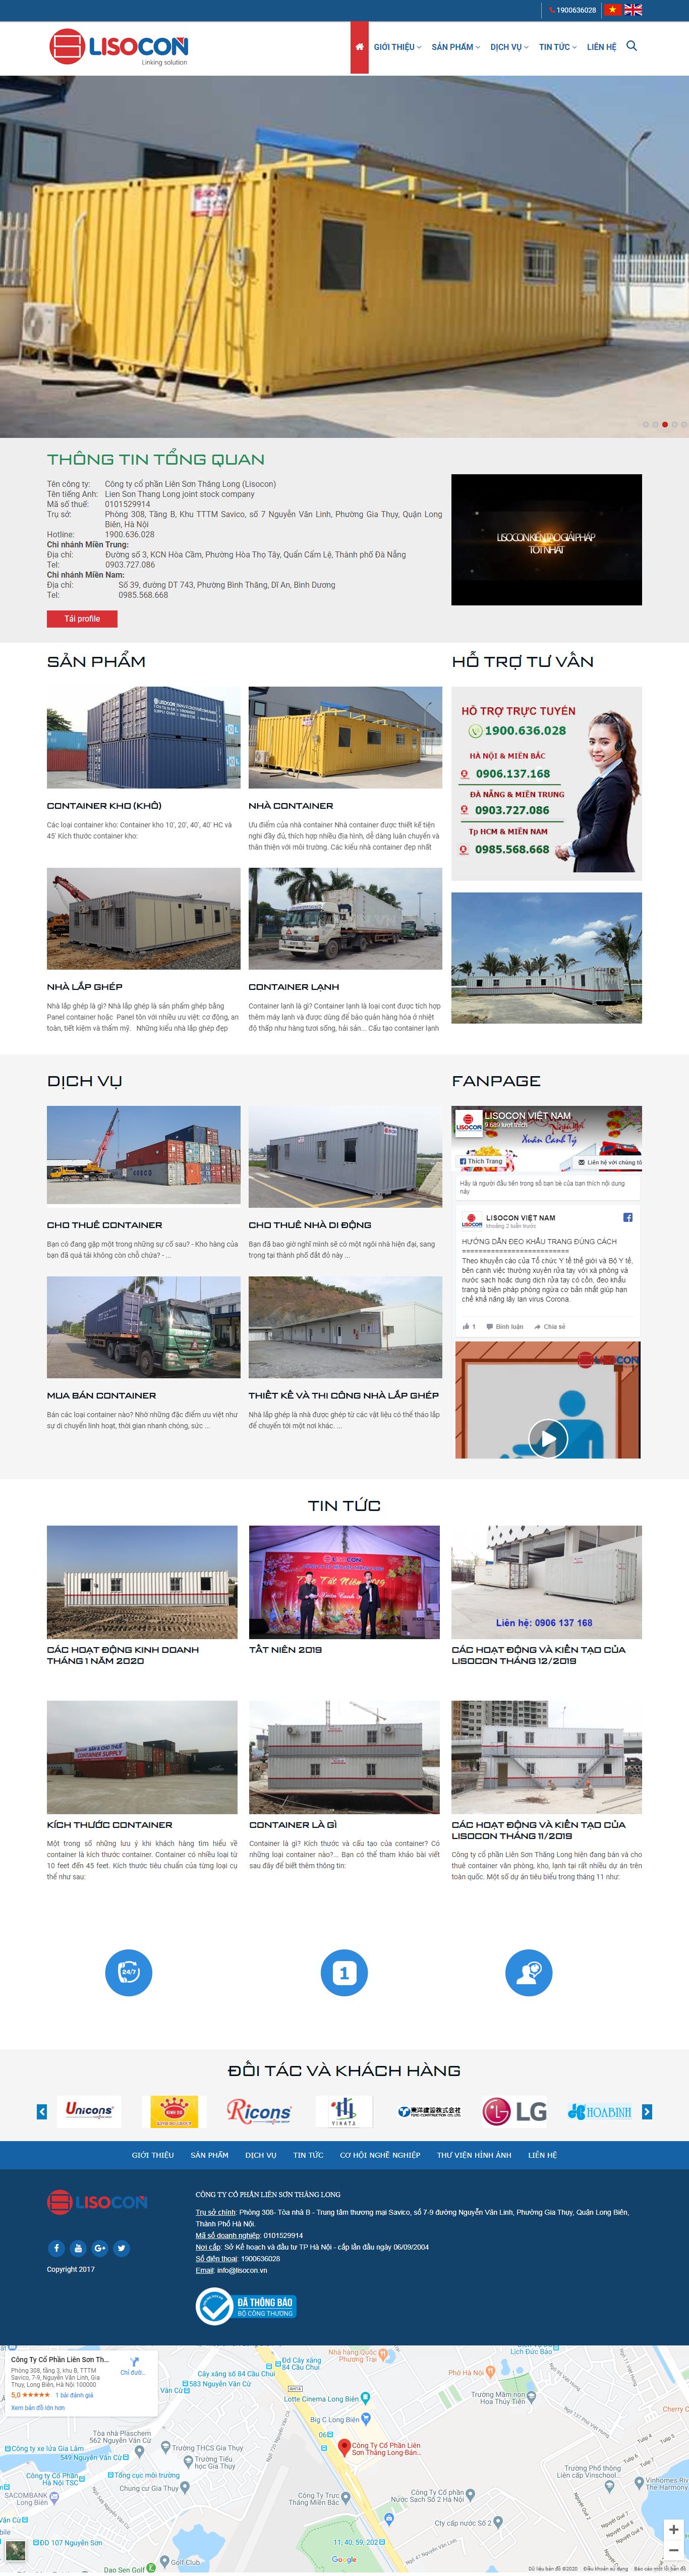 Thiết kế Website container - lisocon.vn